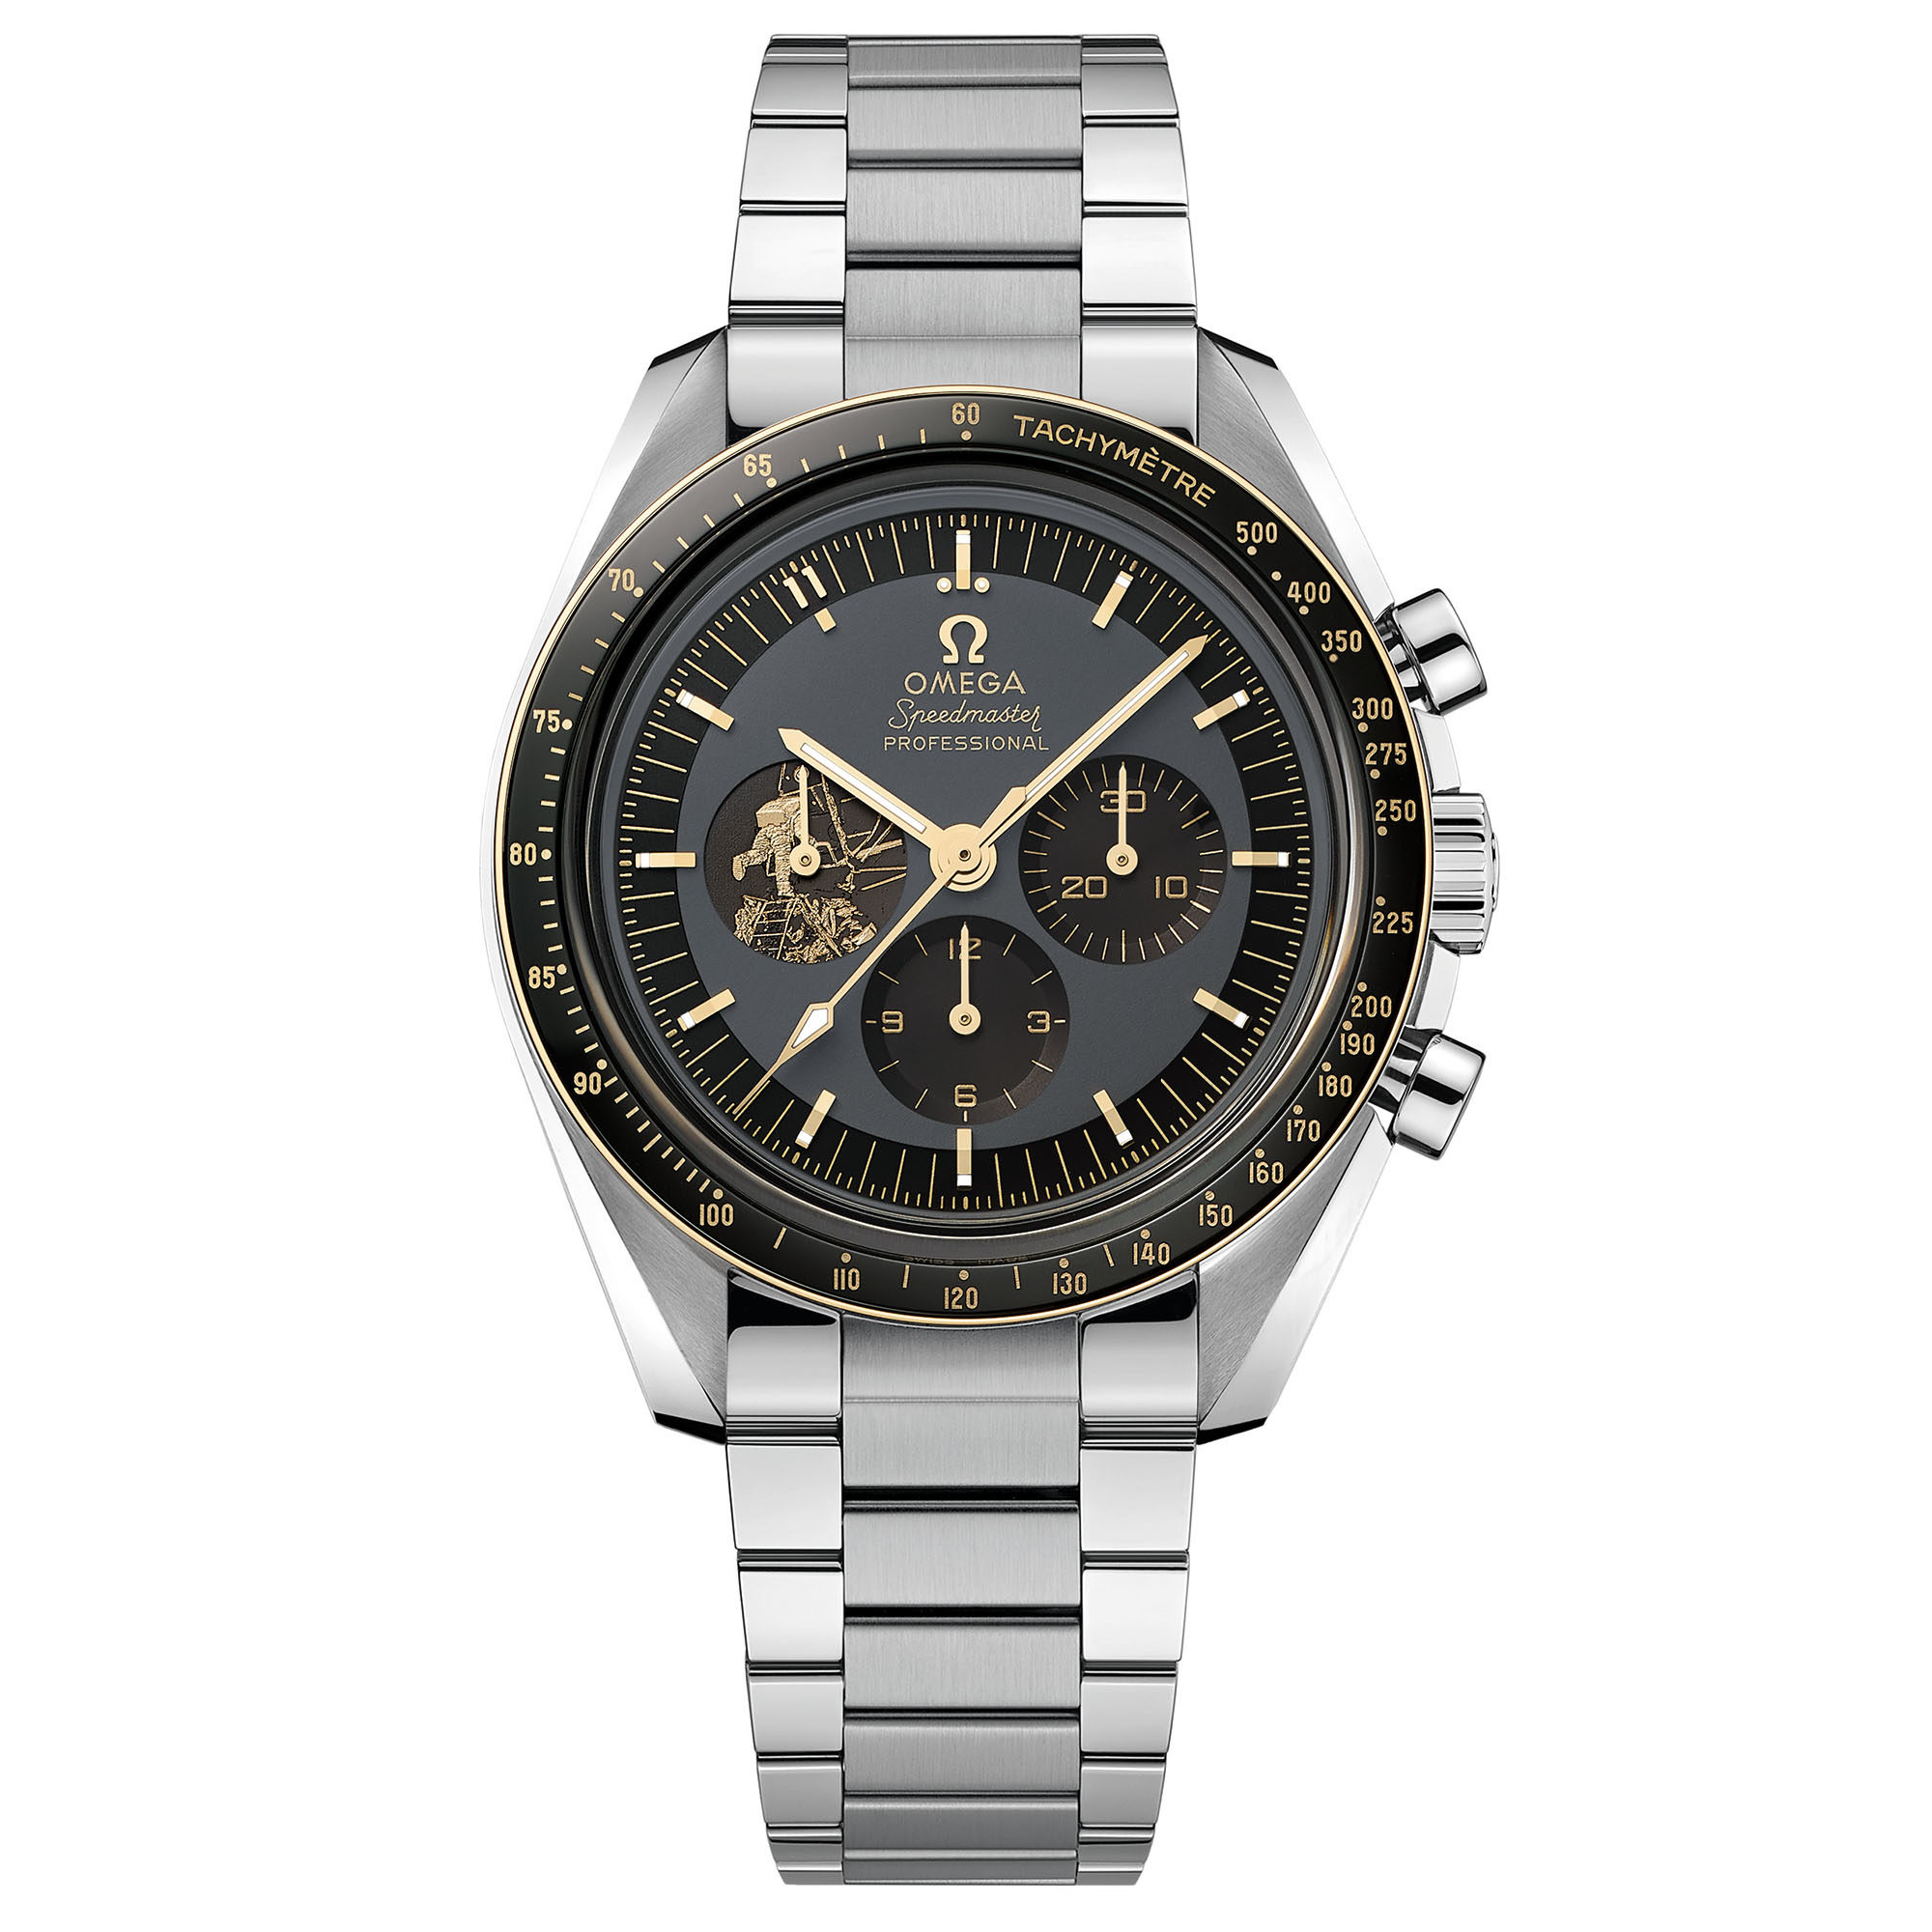 moonwatch anniversary limited series apollo 11 50th anniversary